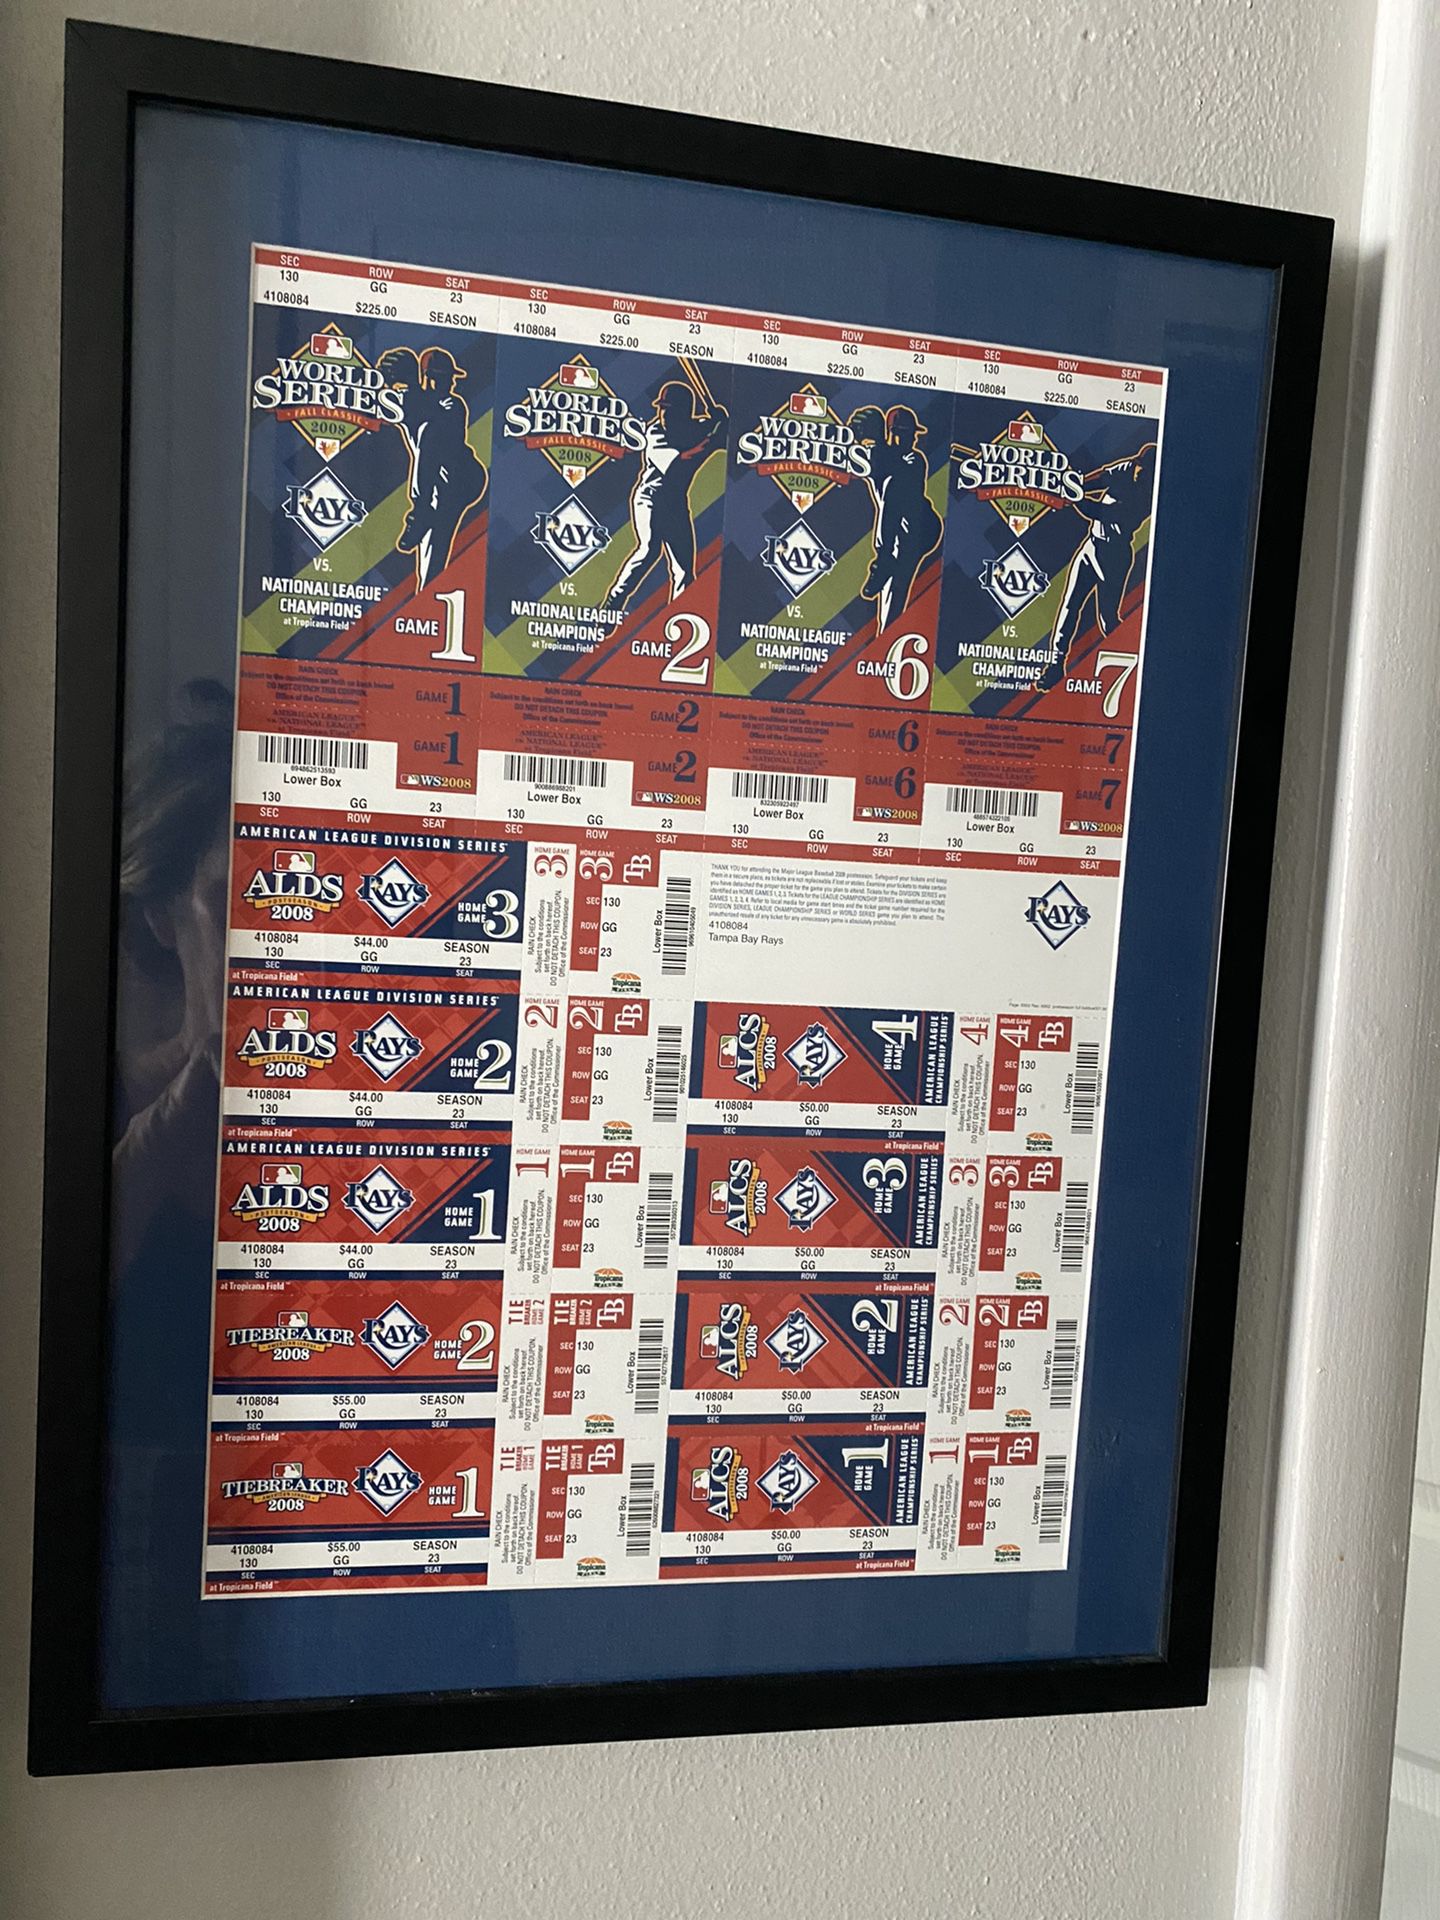 Collectibles Tampa Bay Rays/Phillies Tickets 2008 World Series Full Set Games